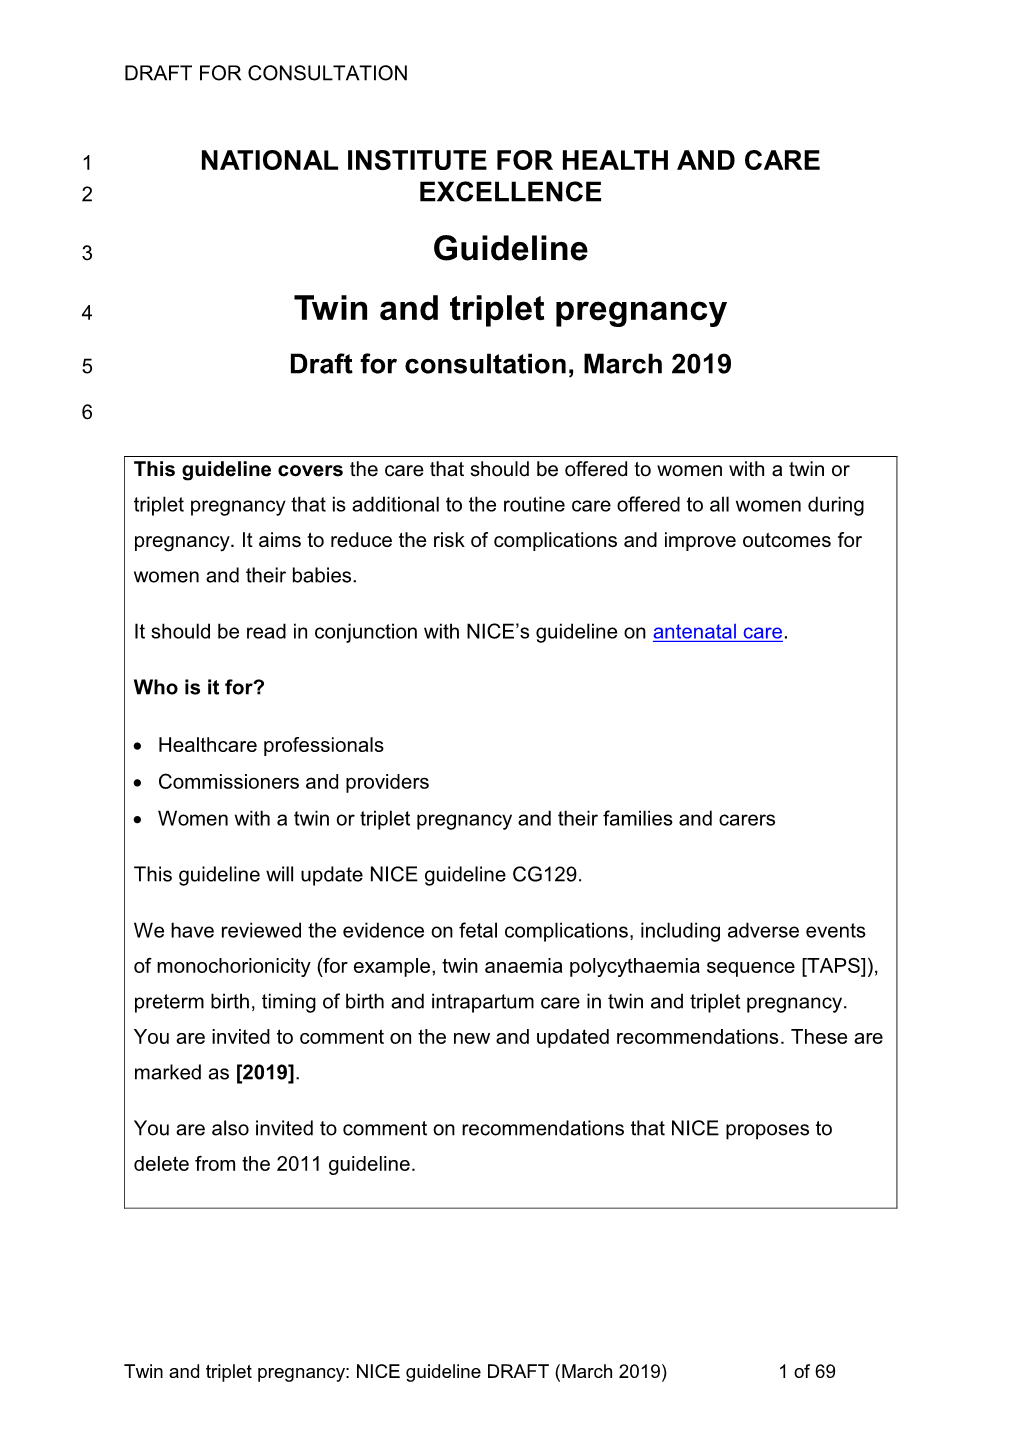 (NICE) Guidelines for Twin and Triplet Pregnancy